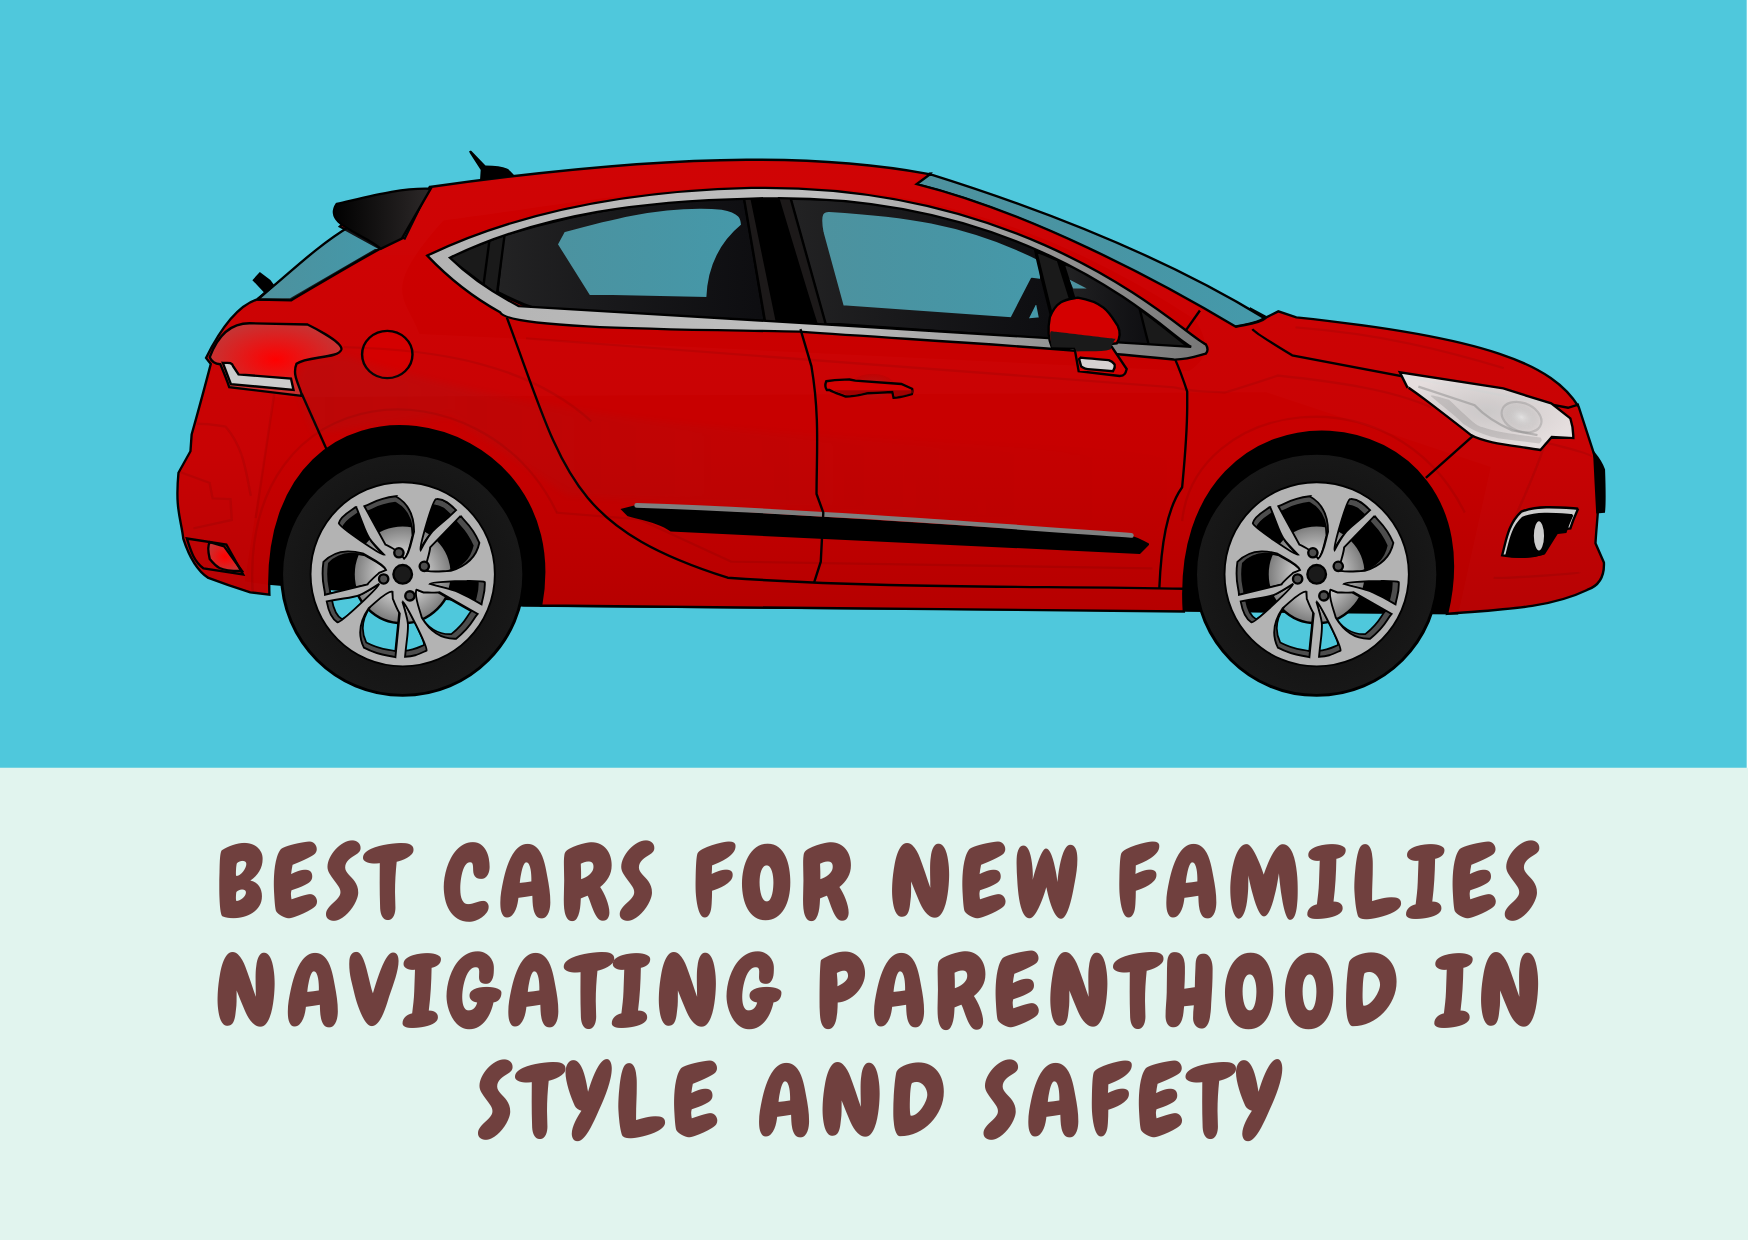 Best Cars for New Families: Navigating Parenthood in Style and Safety